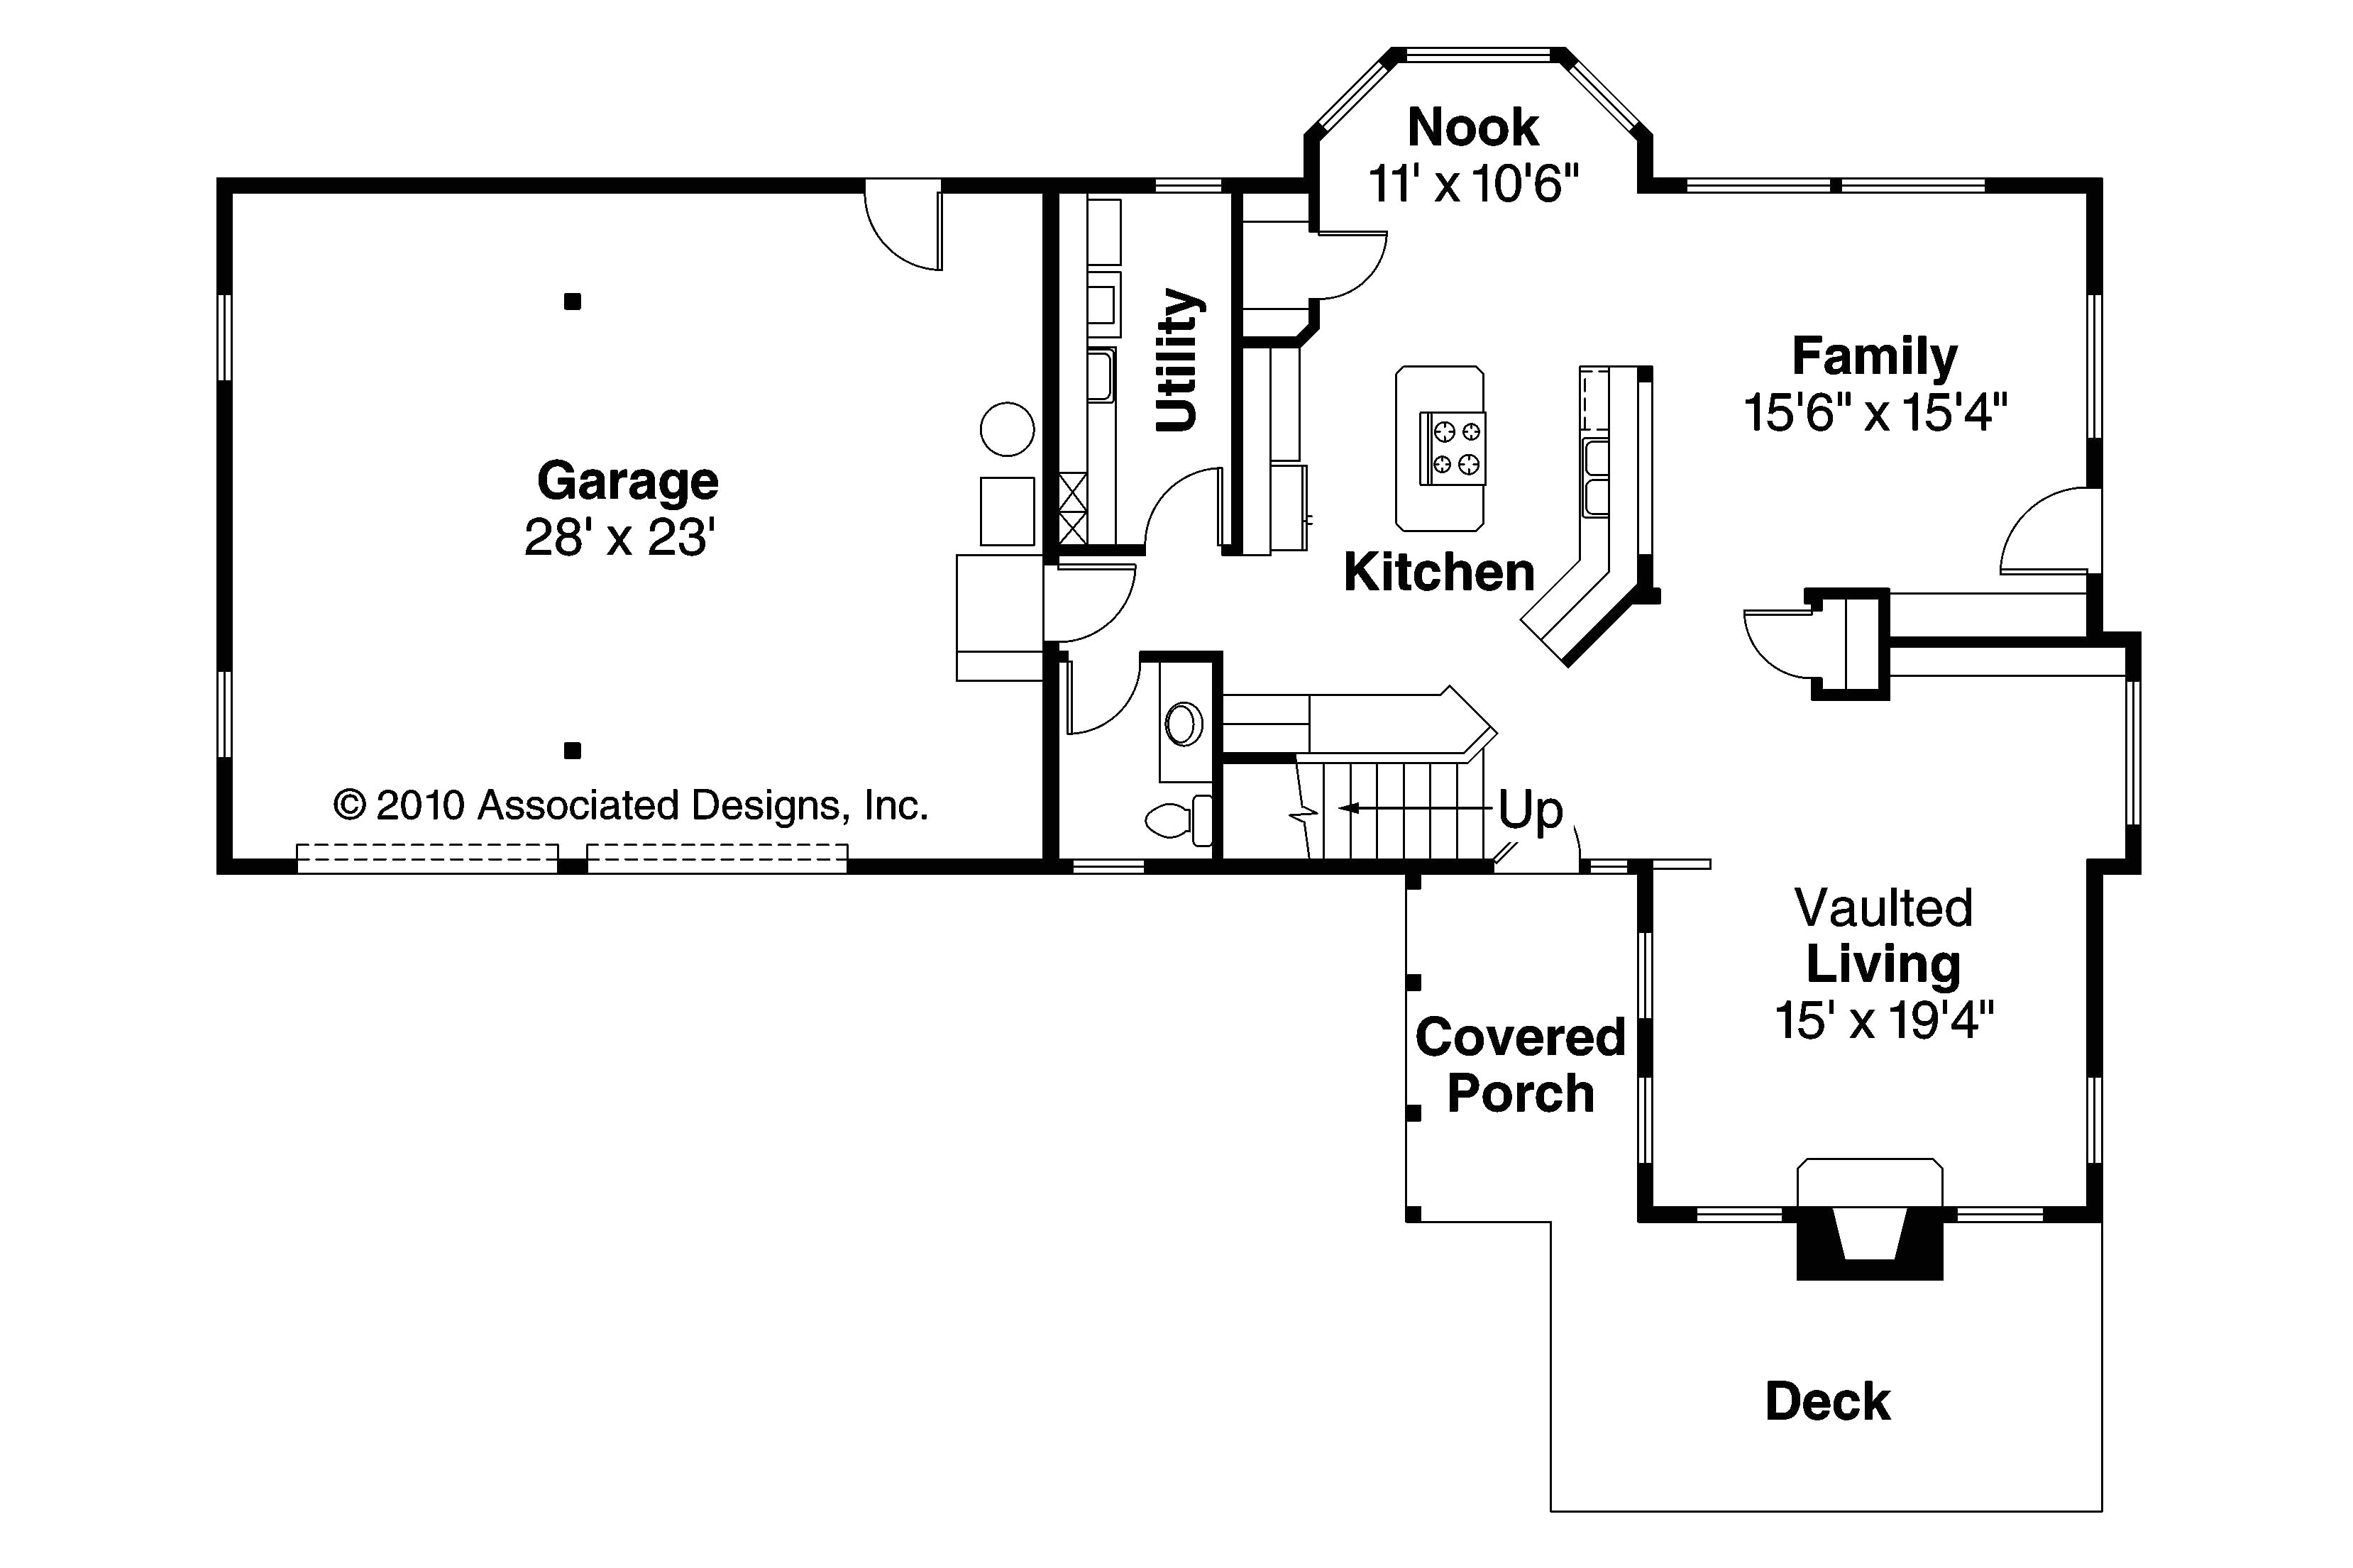 16a 20 house plans awesome 16 20 floor plan 28 16 tiny house